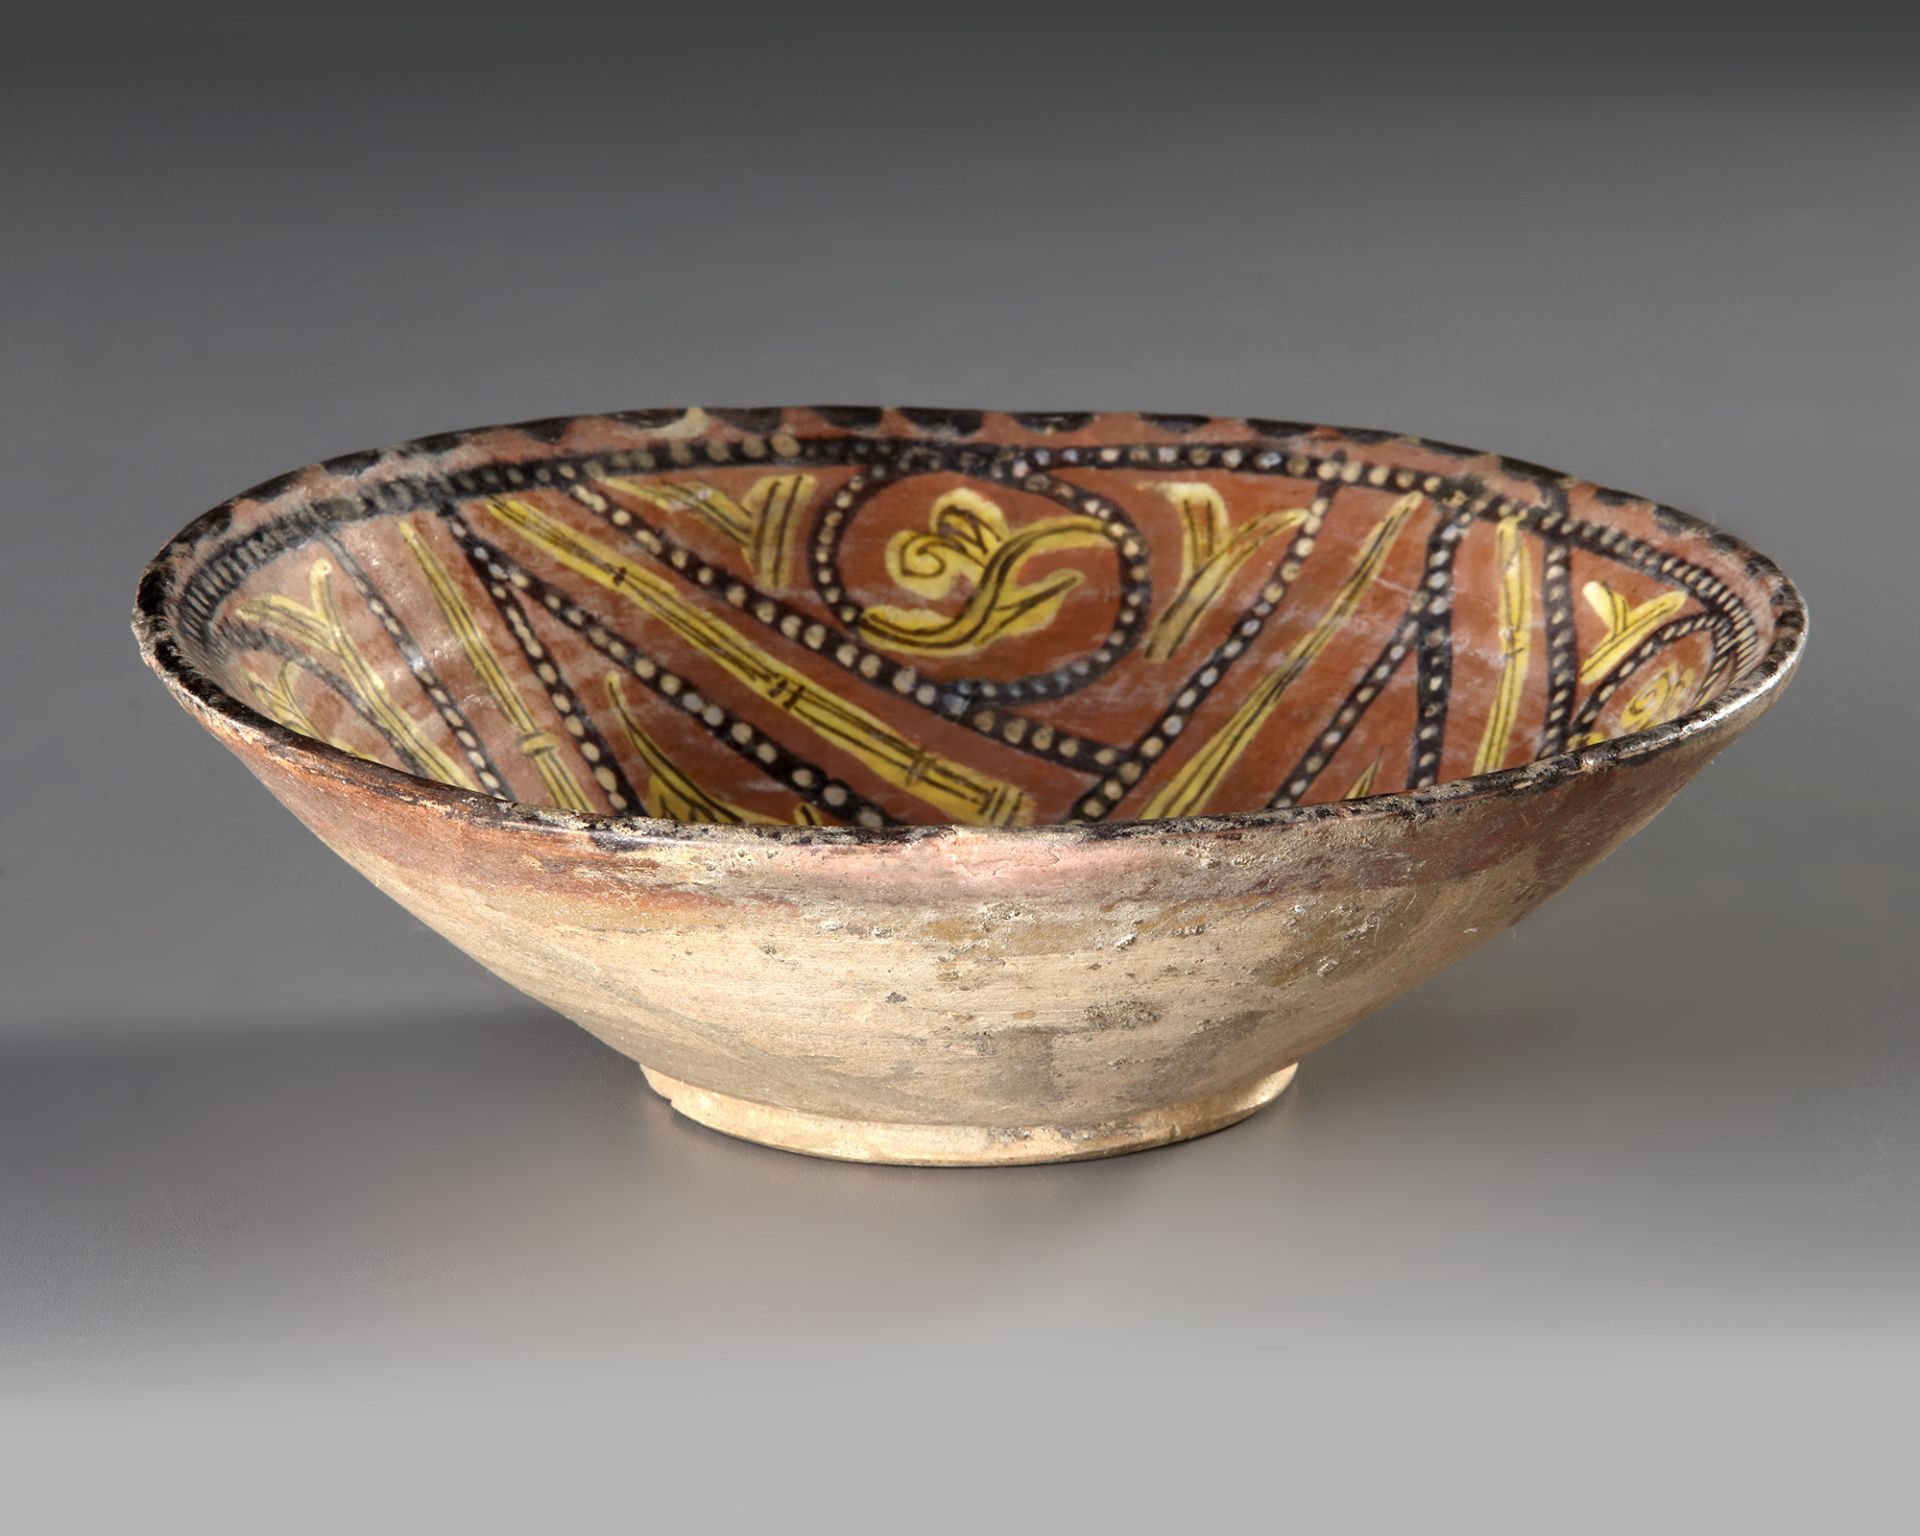 A NISHAPUR CONICAL POTTERY BOWL, PERSIA, 10TH CENTURY - Image 3 of 10